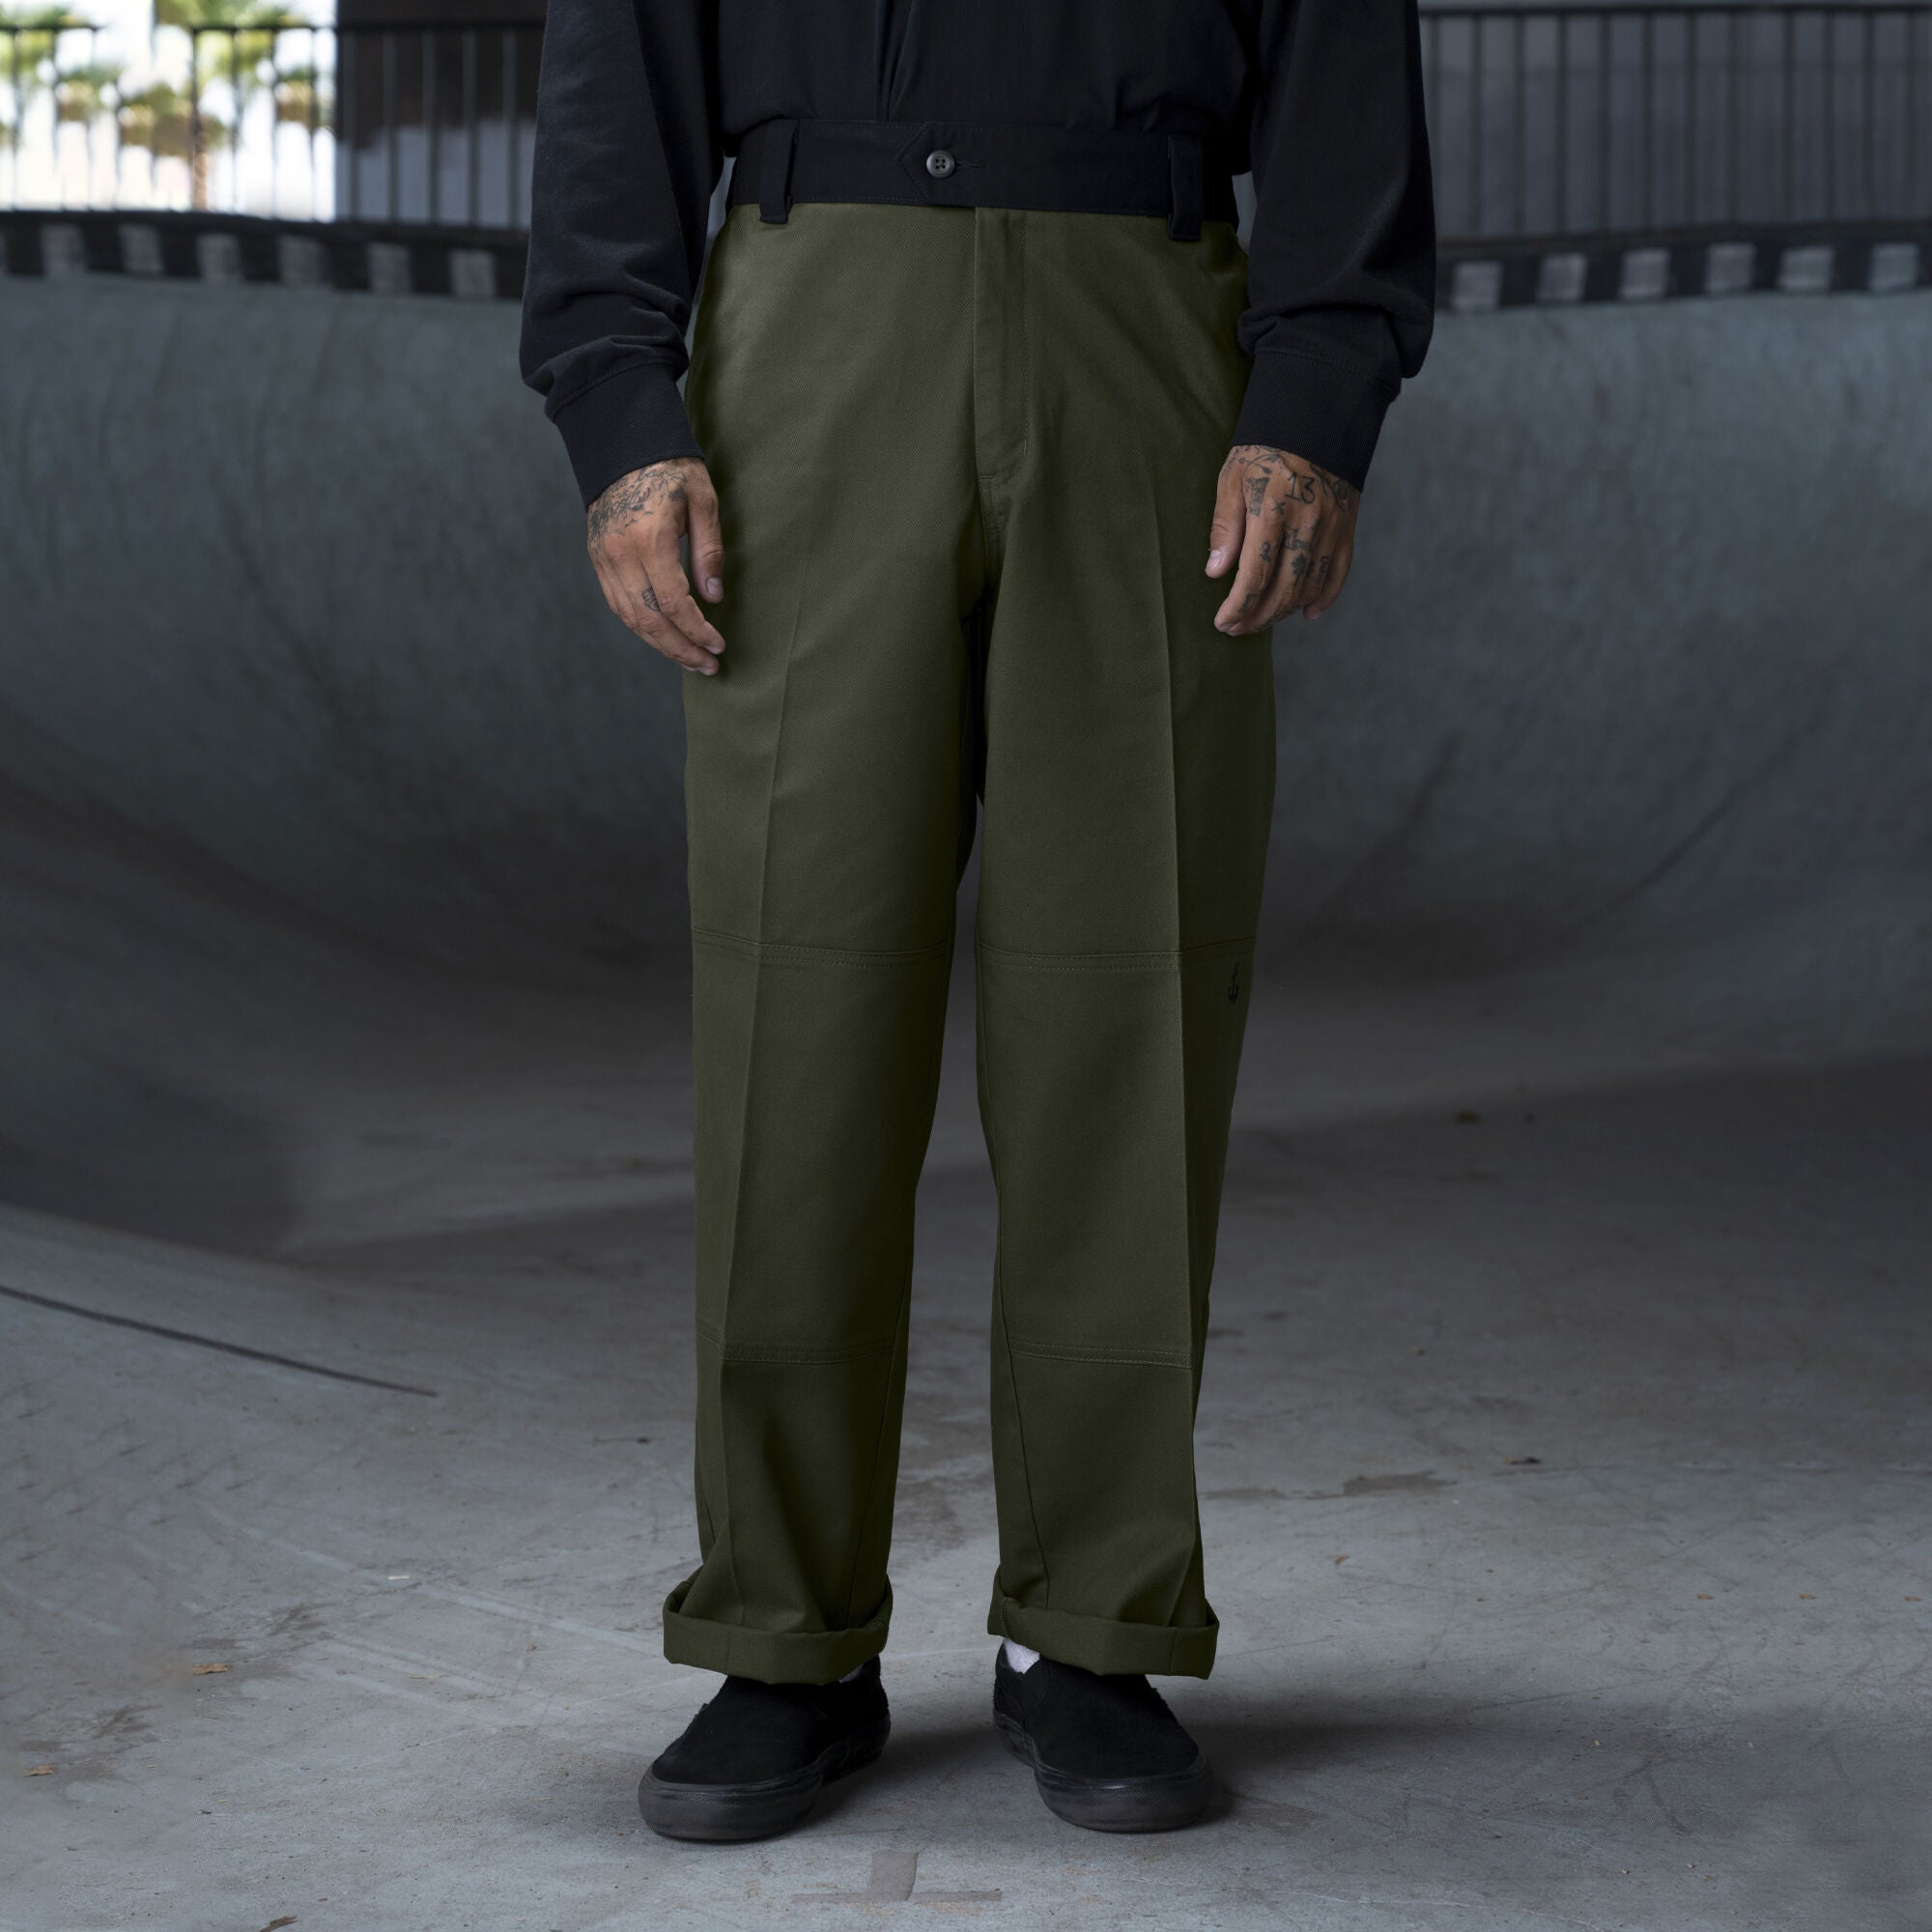 Dickies Ronnie Sandoval Double Knee Pants - Olive Green/Black Color Bl